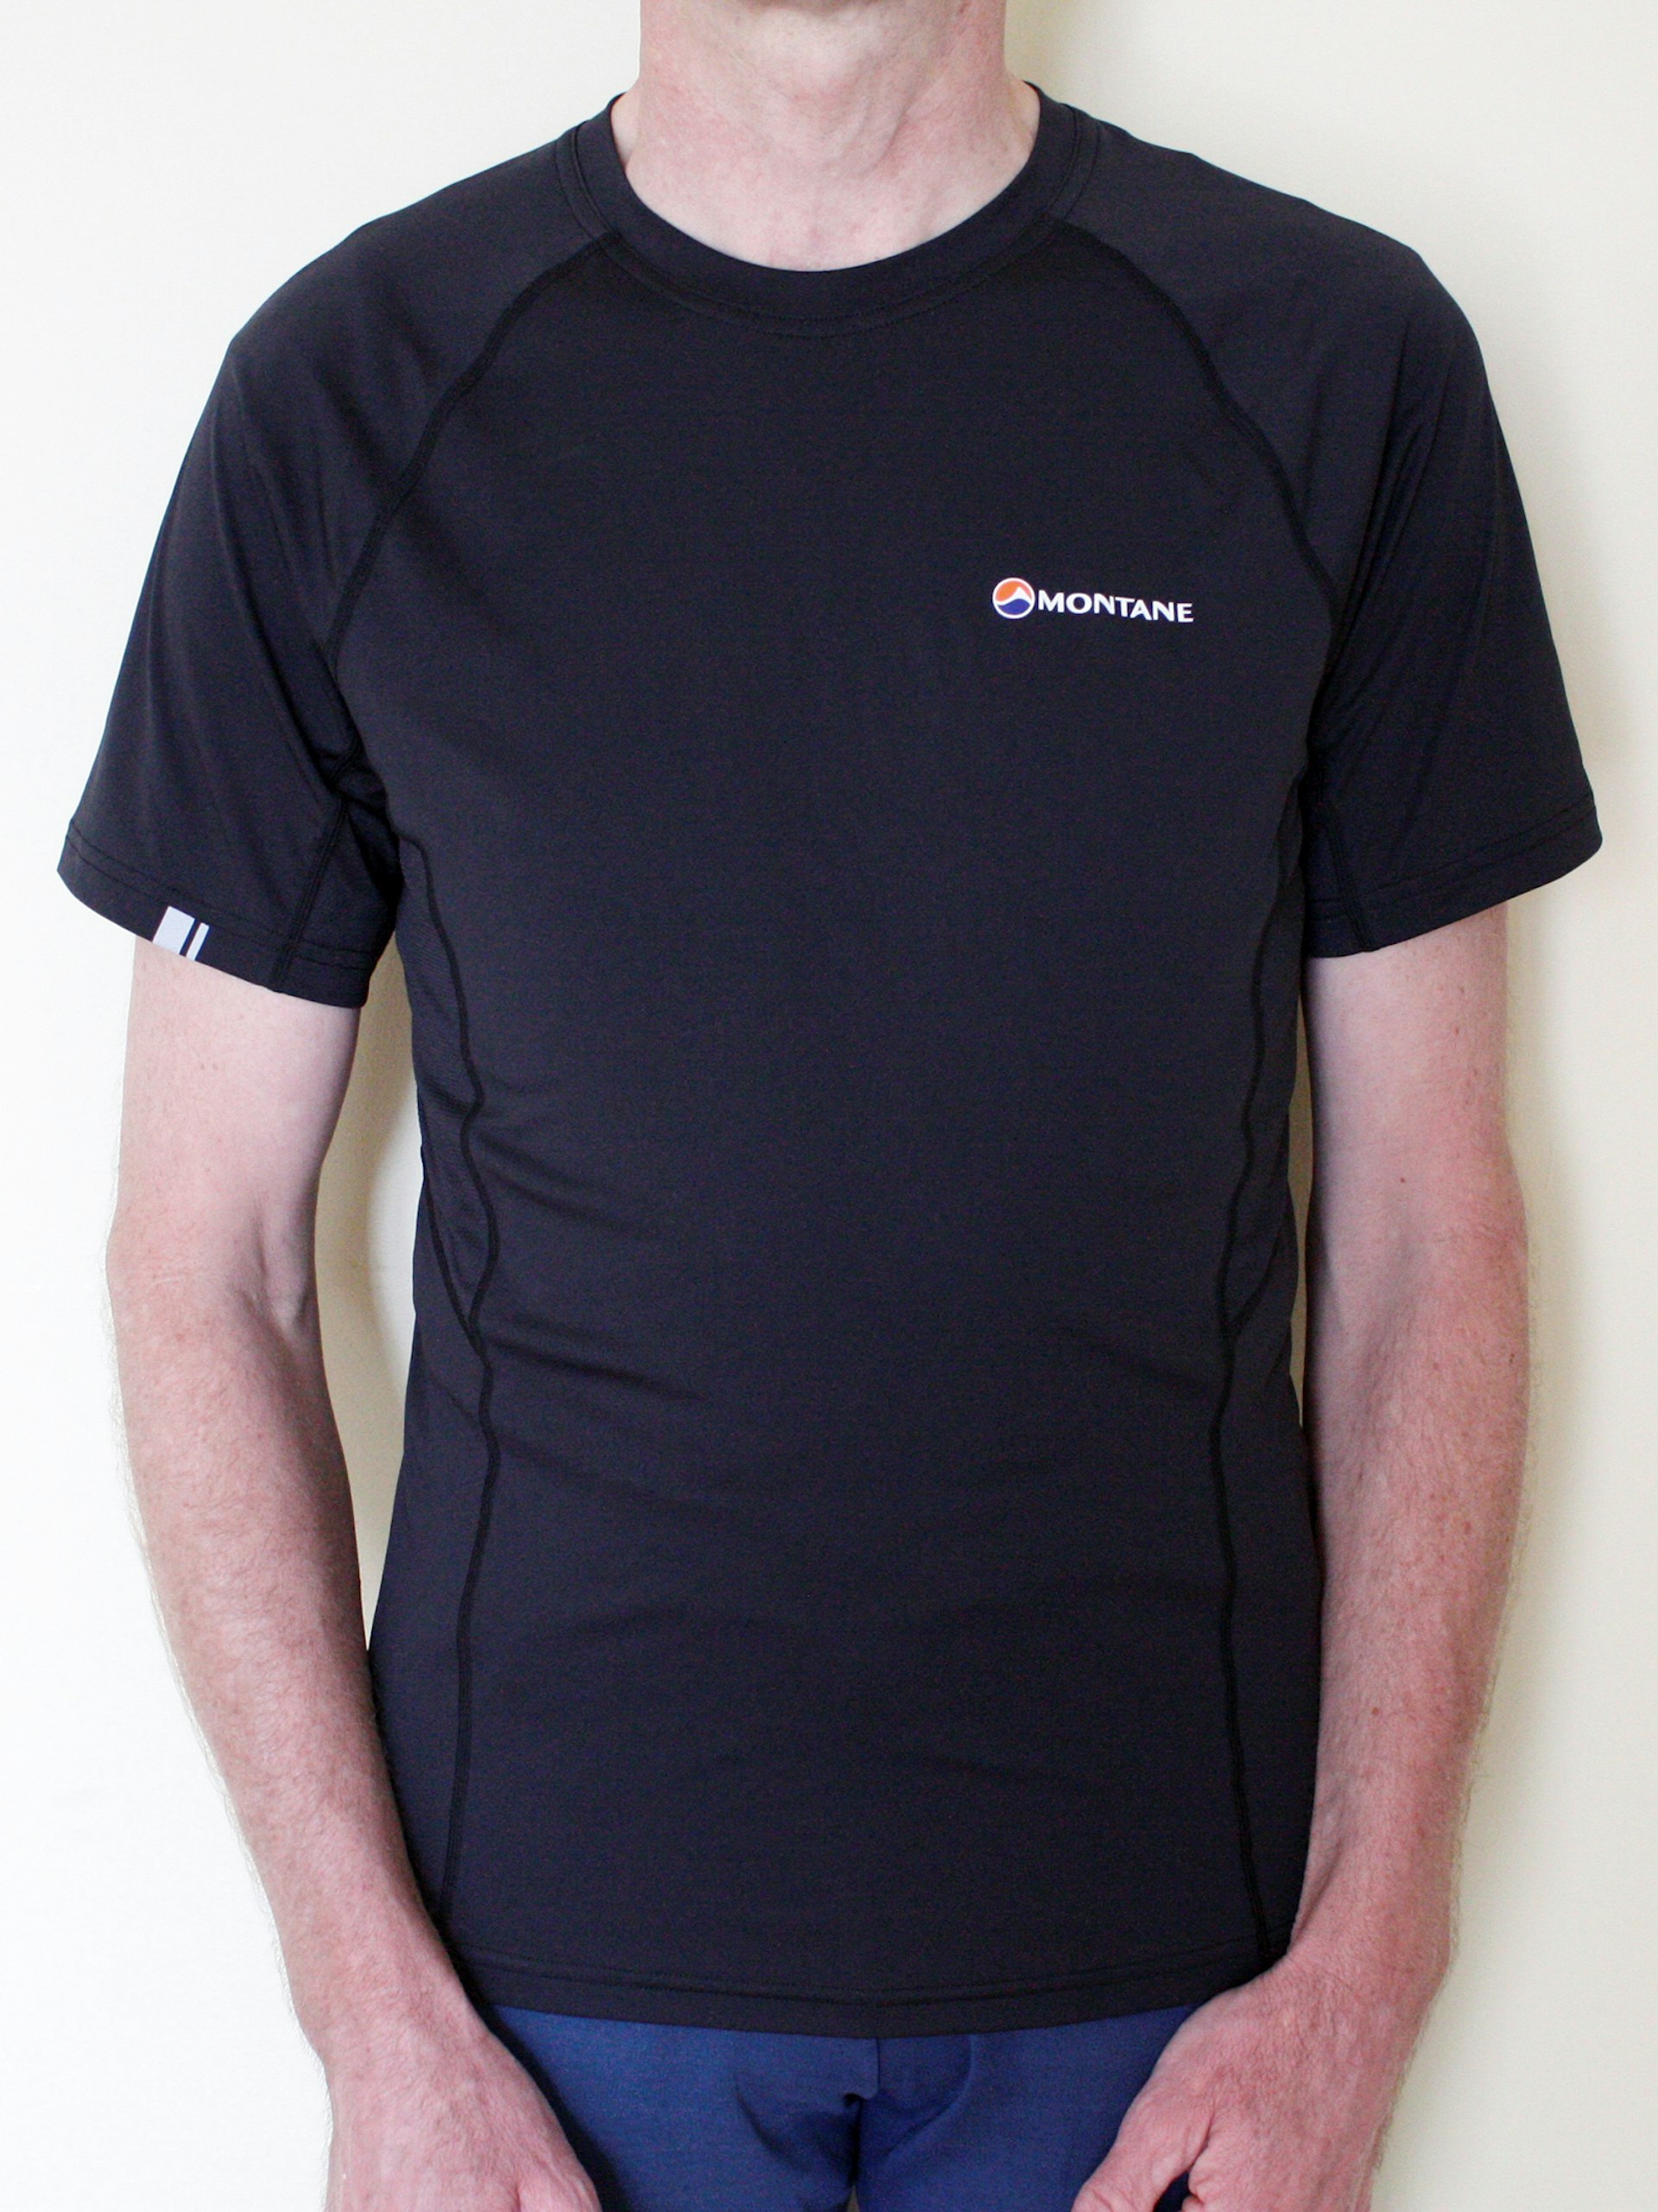 The Sonic T-shirt is very comfortable and ideal for active adventures in hot or cold climates © David Else / Lonely Planet